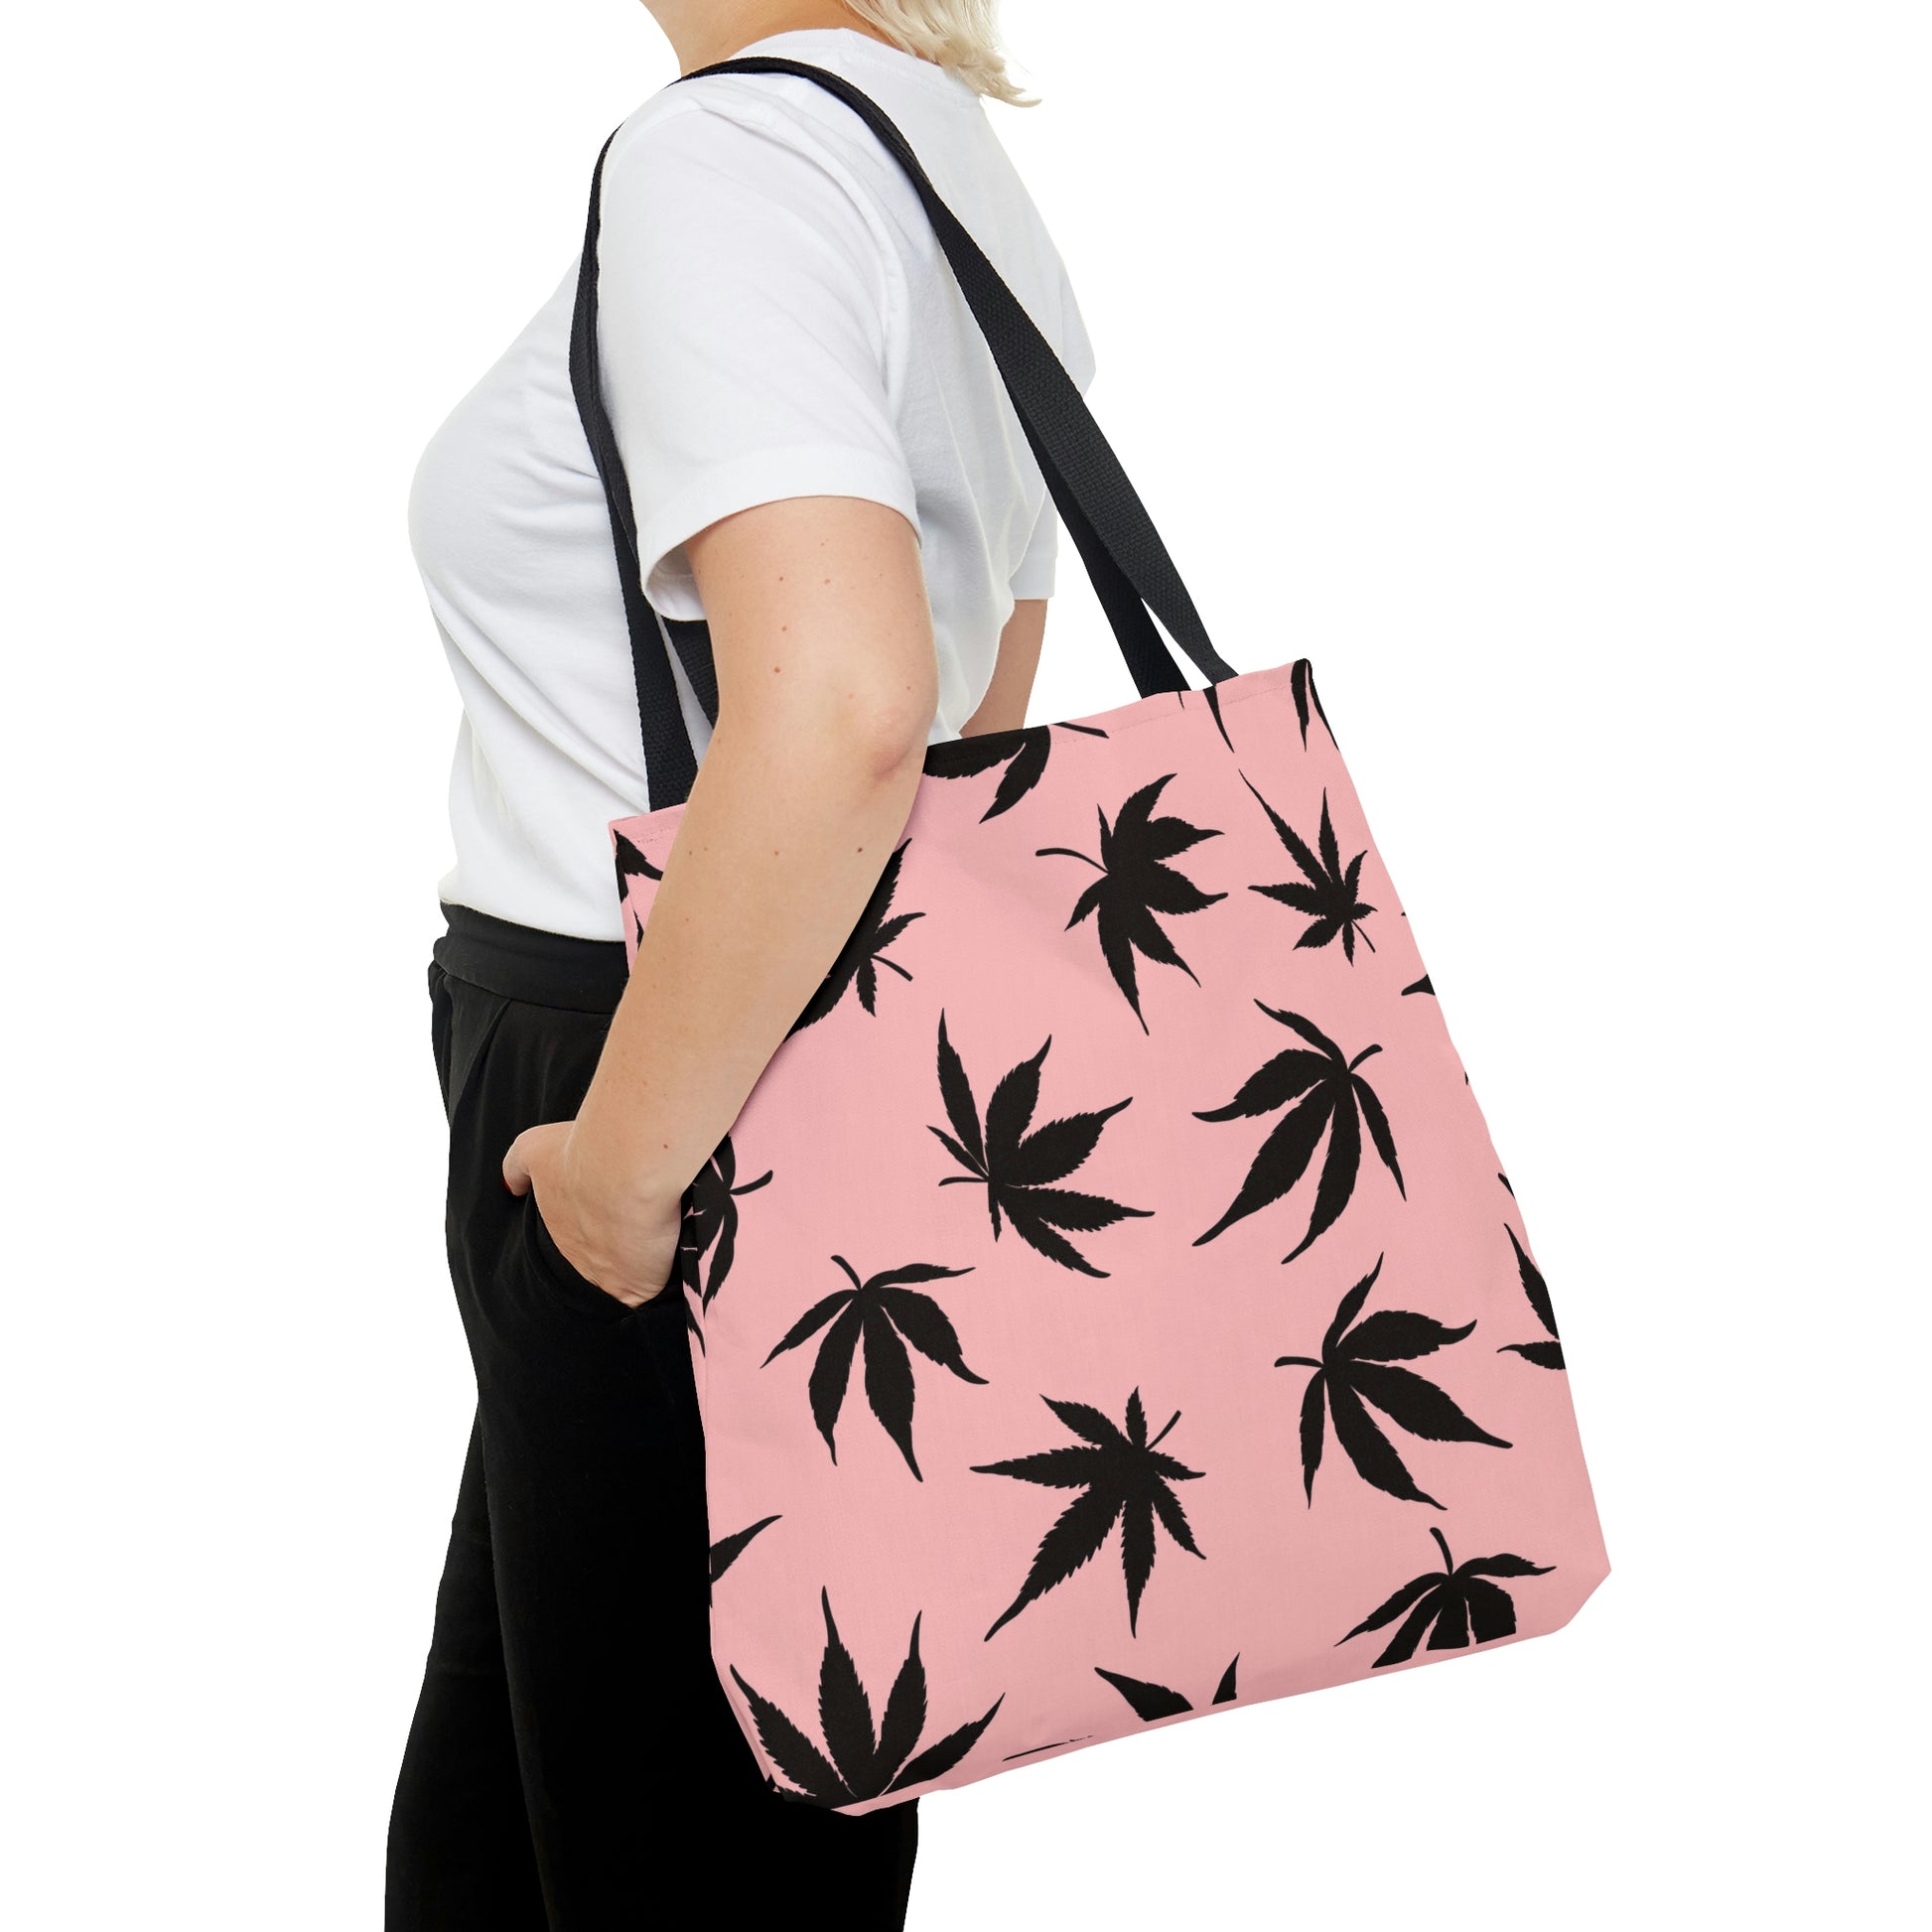 A woman is confidently wearing the Marijuana Leaves Pink Tote Bag